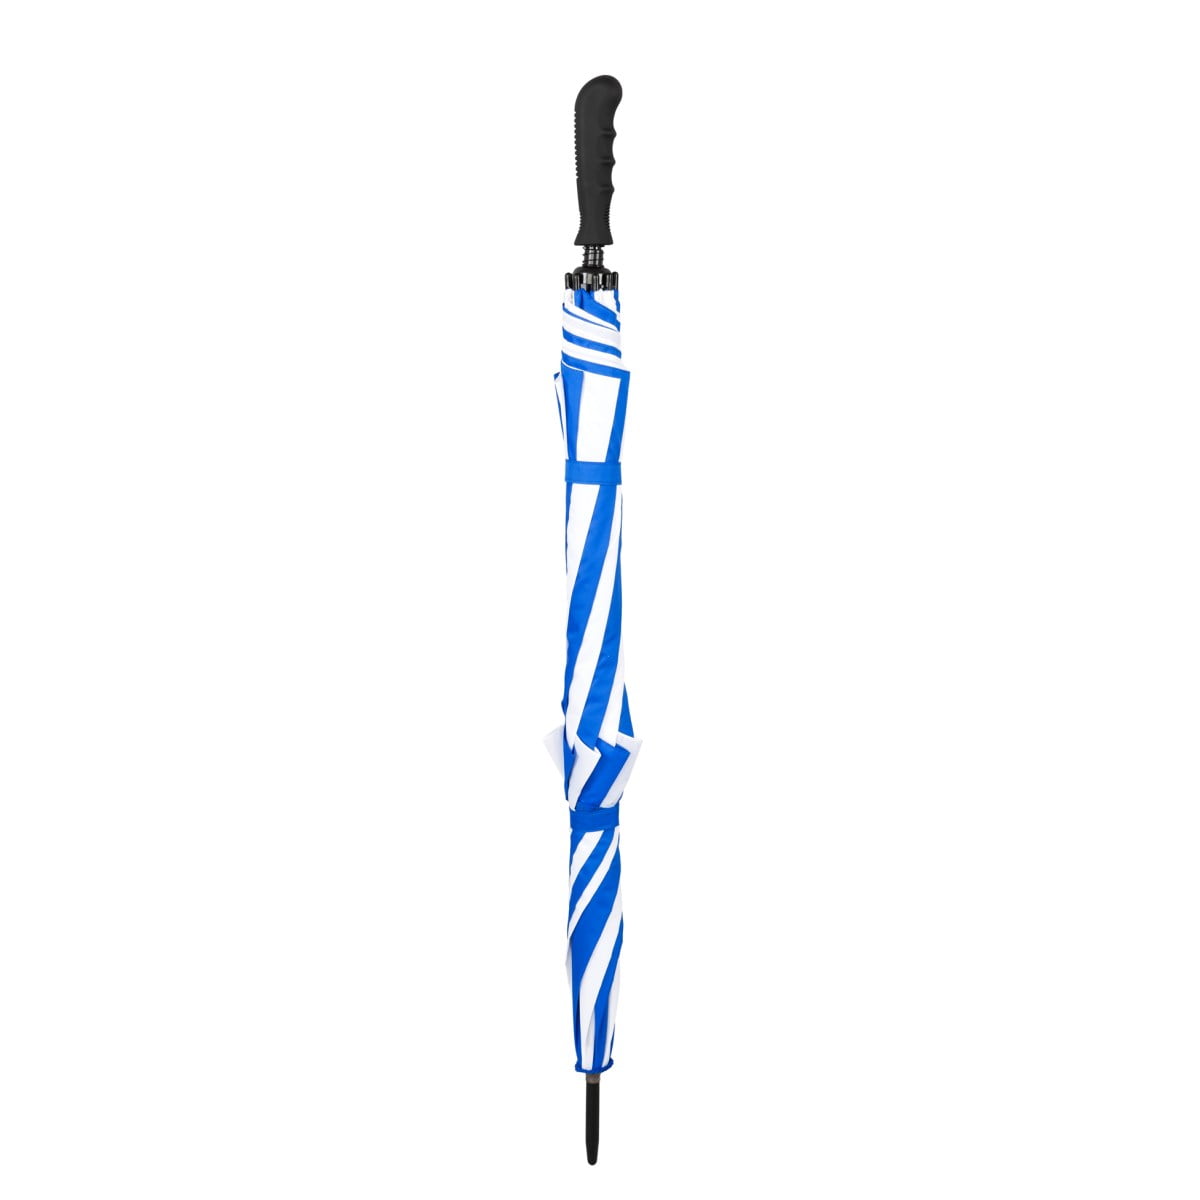 Royal Blue & White Windproof Vented Golf Umbrella - closed